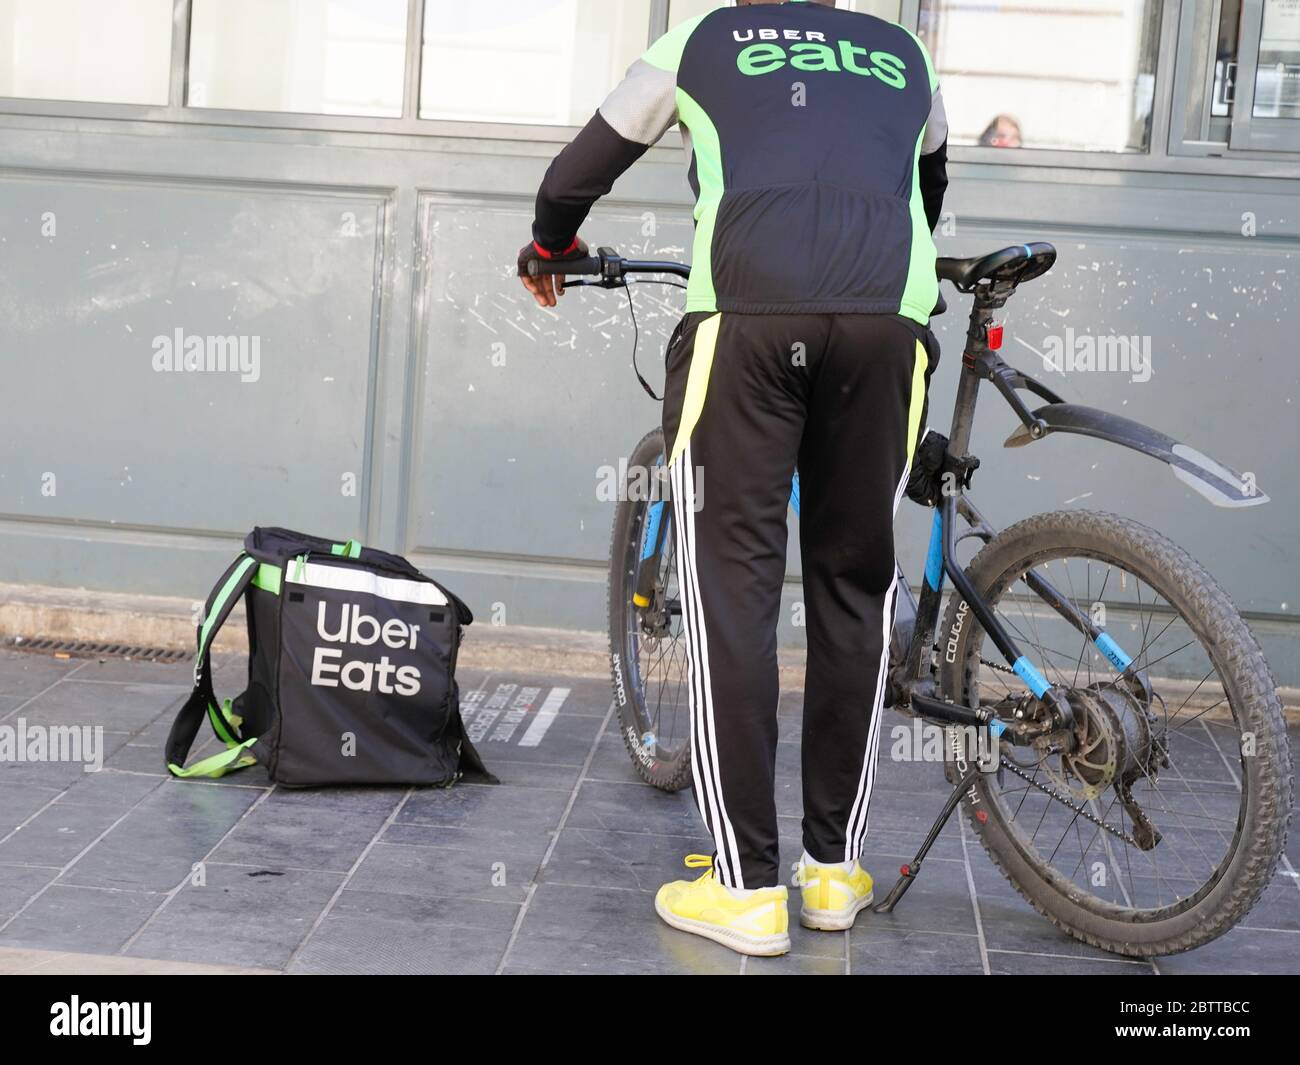 Bordeaux , Aquitaine / France - 05 05 2020 : Uber eats bike delivery man bike and backpack Stock Photo